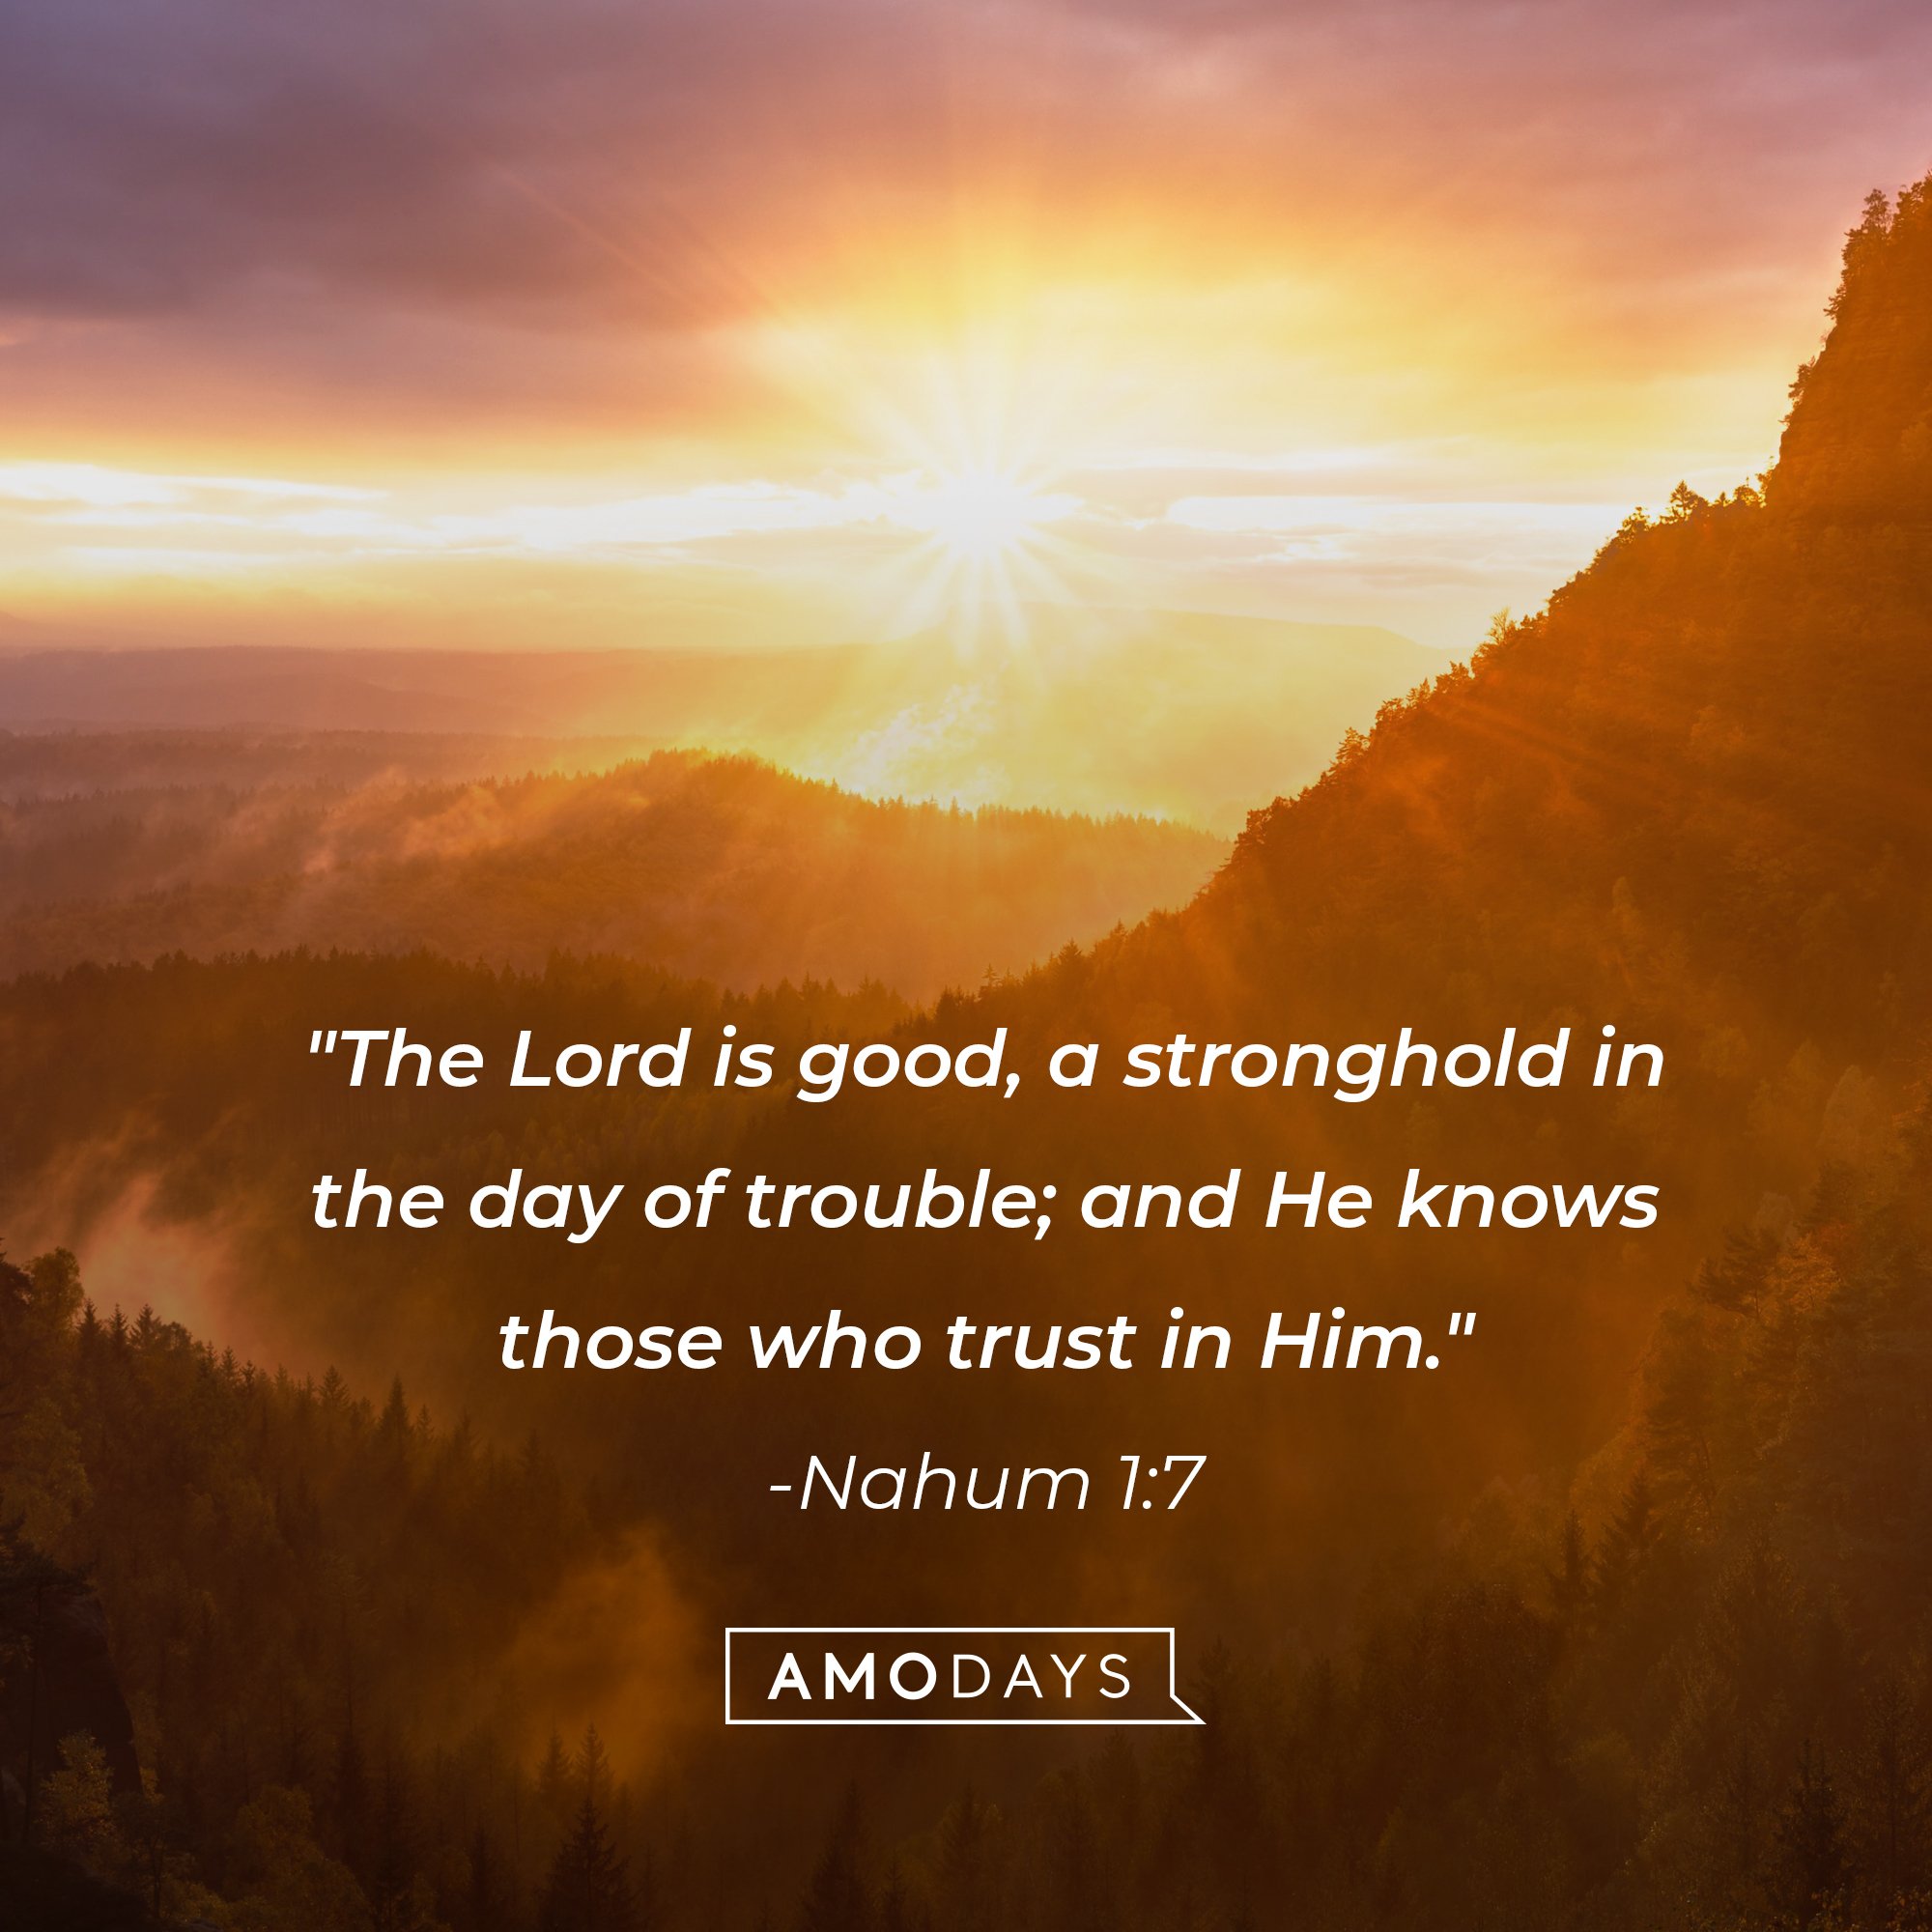 Quote from the Bible, Nahum 1:7: "The Lord is good, a stronghold in the day of trouble; and He knows those who trust in Him." | Image: AmoDays 